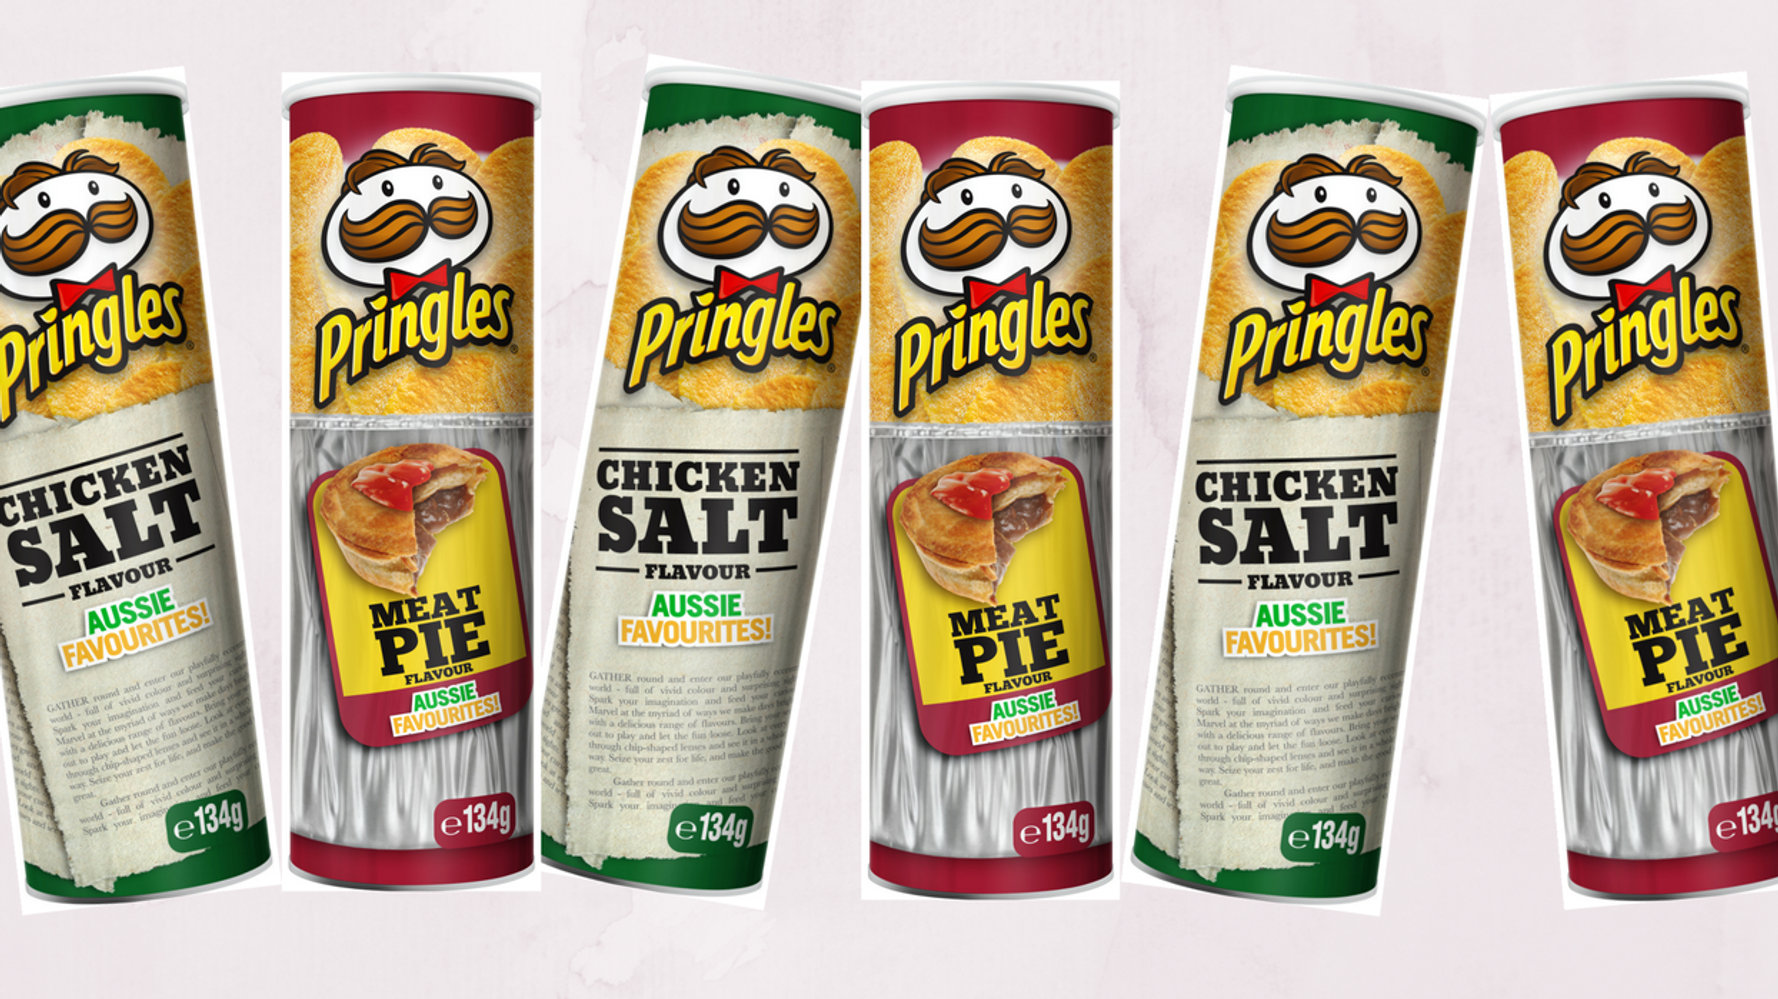 Pringles Just Launched 'Chicken Salt' And 'Meat Pie' Flavours